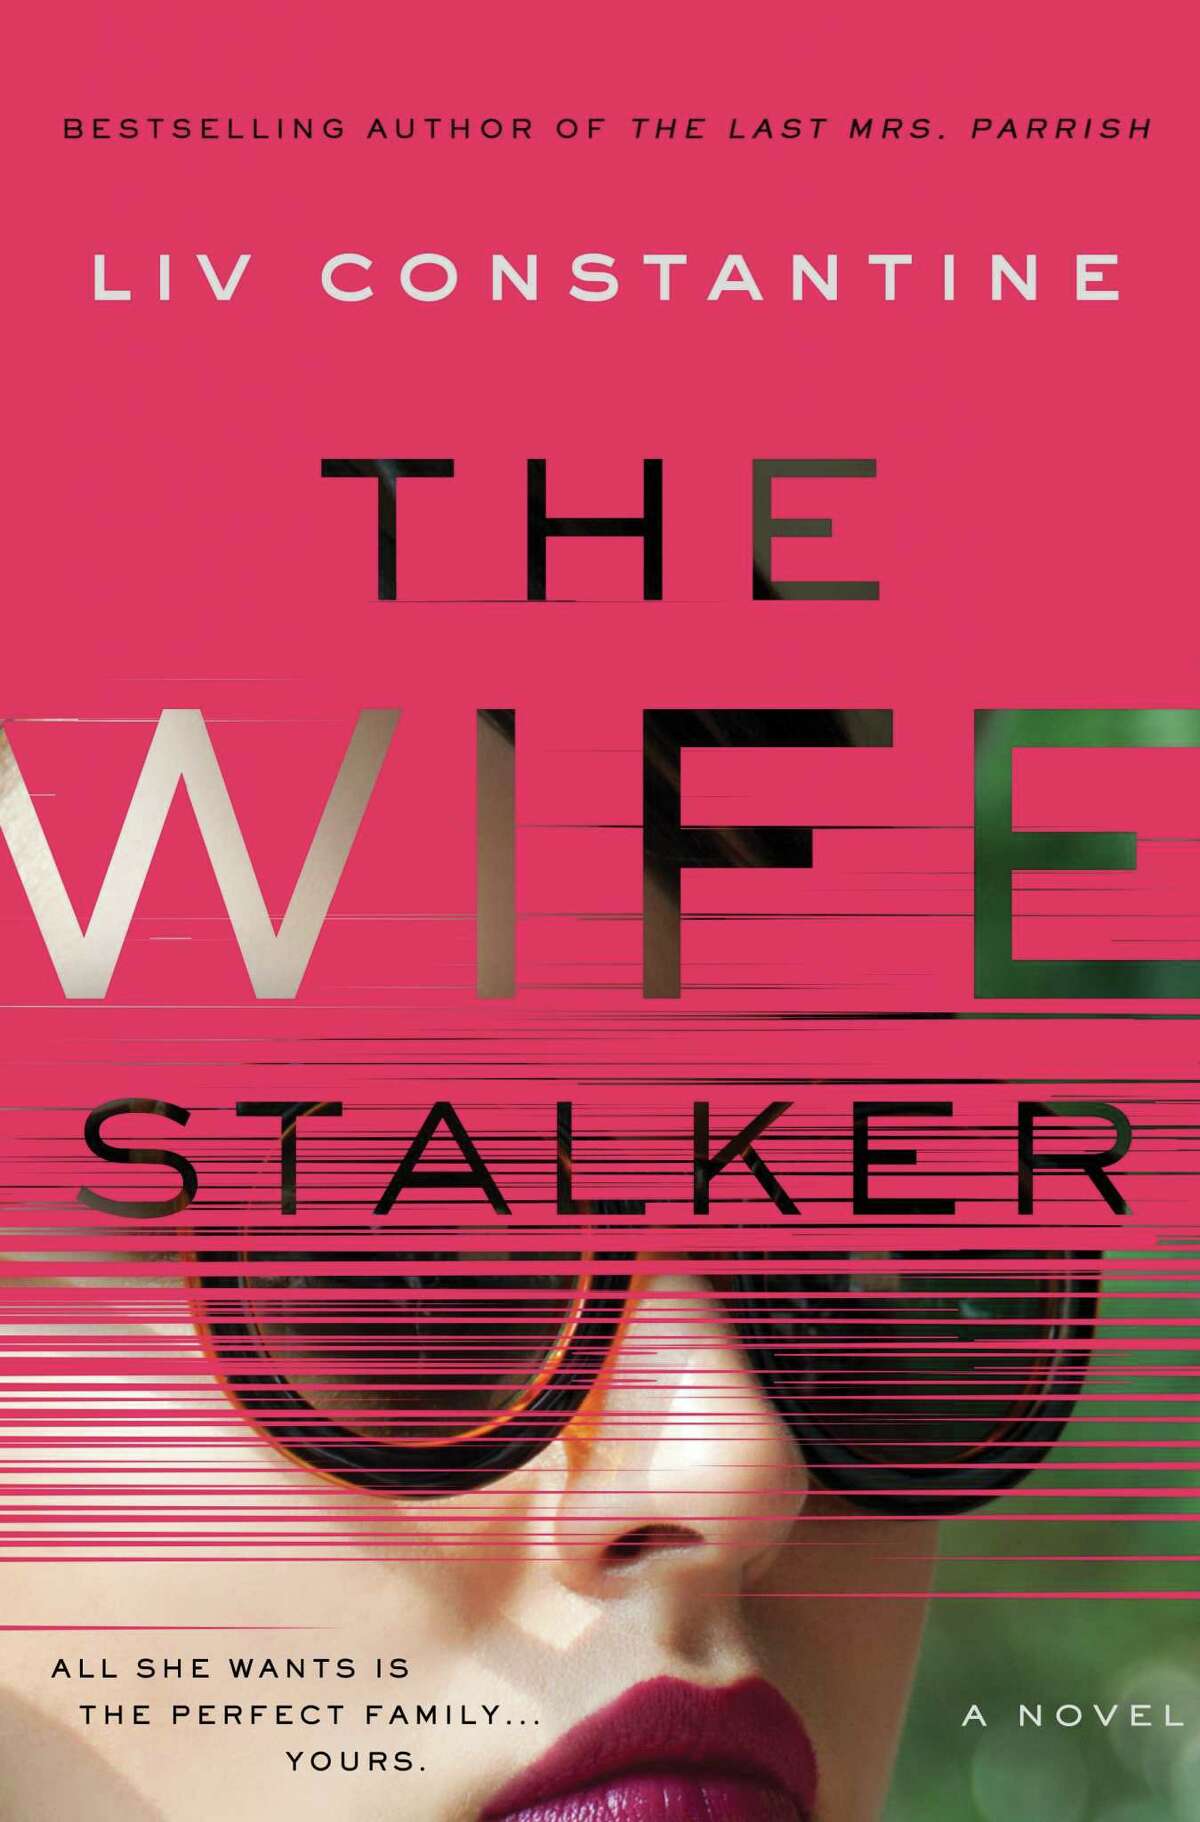 “The Wife Stalker” is the latest book from authors Lynne Constantine and her sister Valerie Constantine who write under the pen name Liv Constantine.